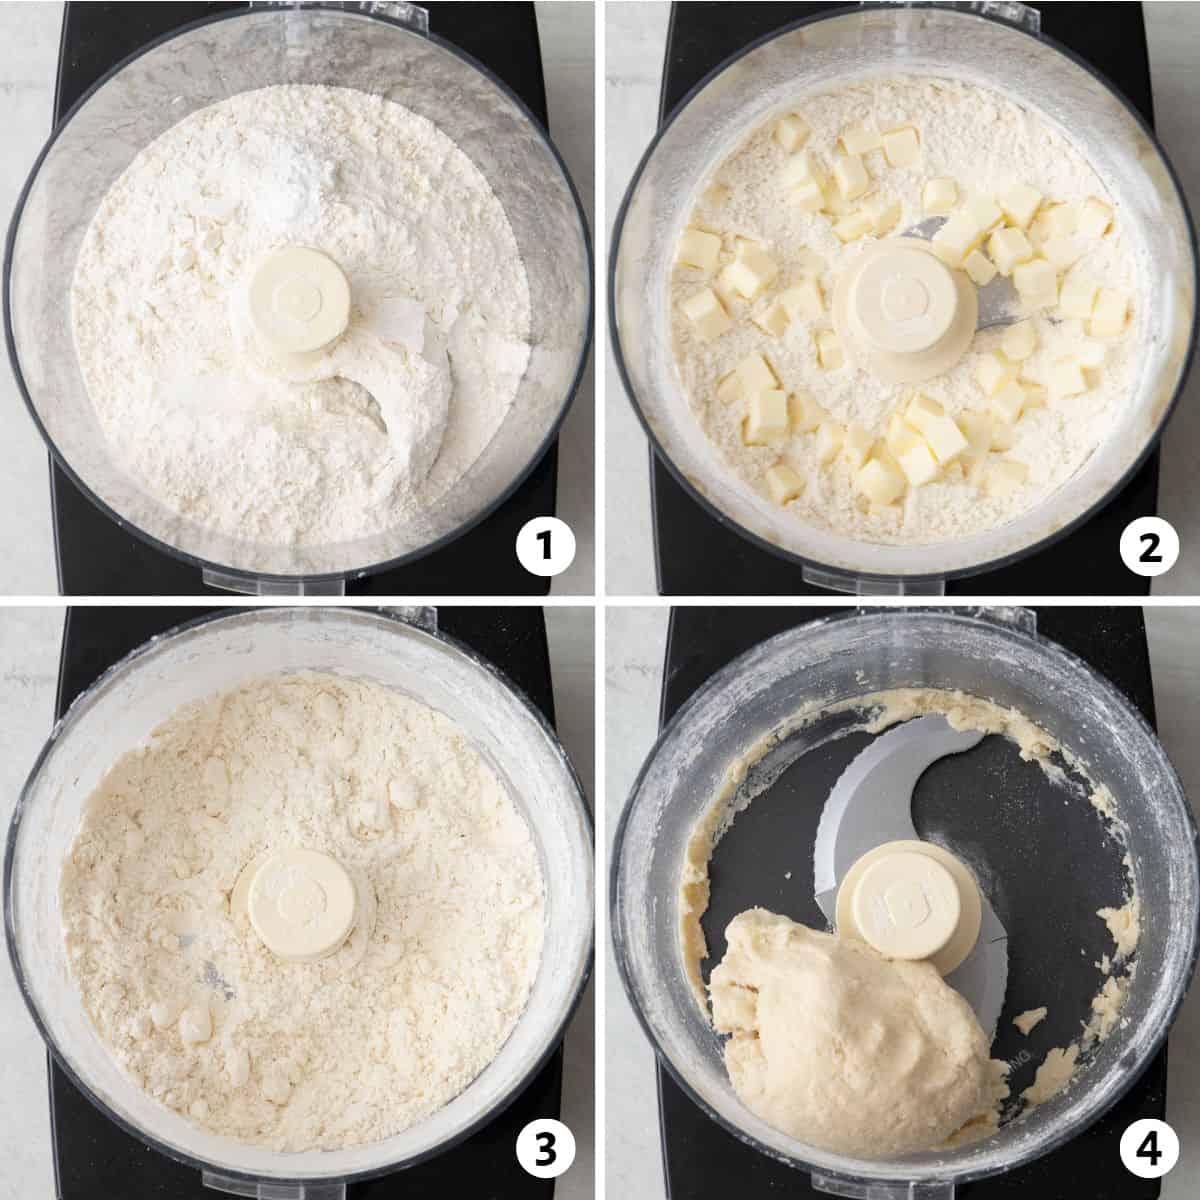 4 image collage making dough: 1- dry ingredients in a food processor, 2- butter cubes added, 3- mixture after butter is chopped in, 4- after processing to show a soft dough ball.